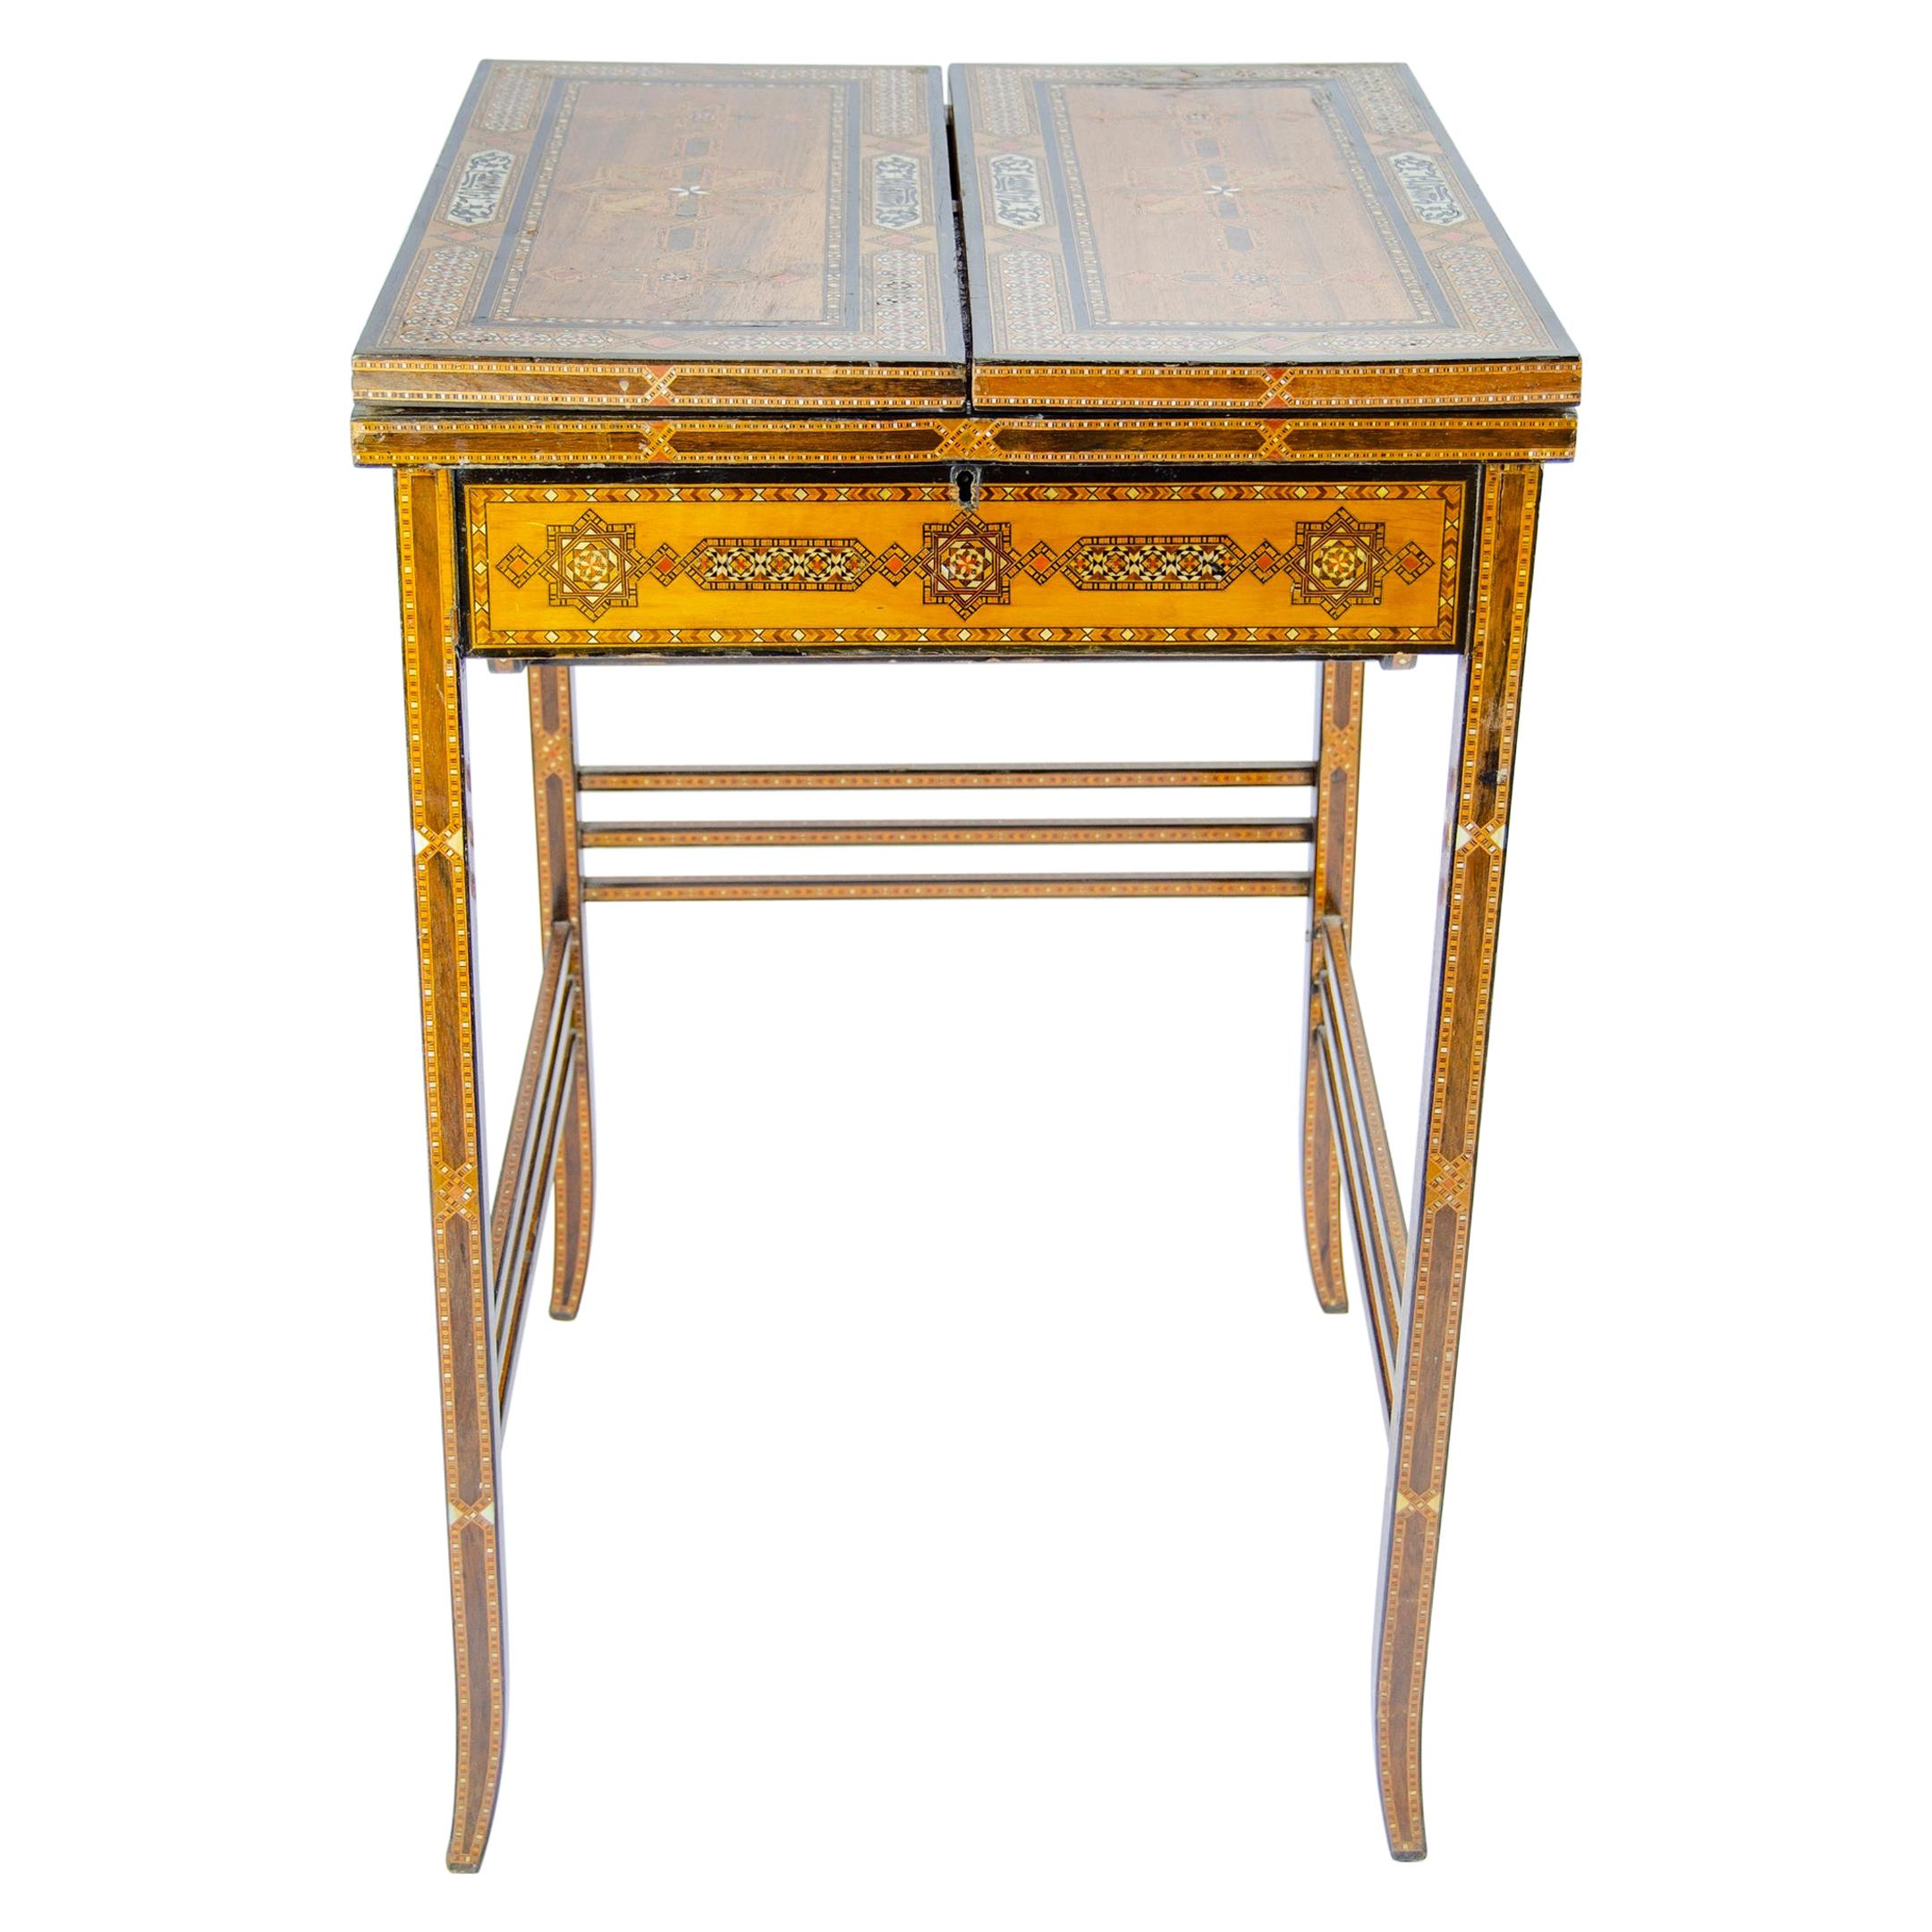 Desk - Secretaire - Moorish inlays
Origin and marquetry of Morocco
Circa 1930. very good condition
Leather interior with wear and tear
Measurements were taken with the desk open.